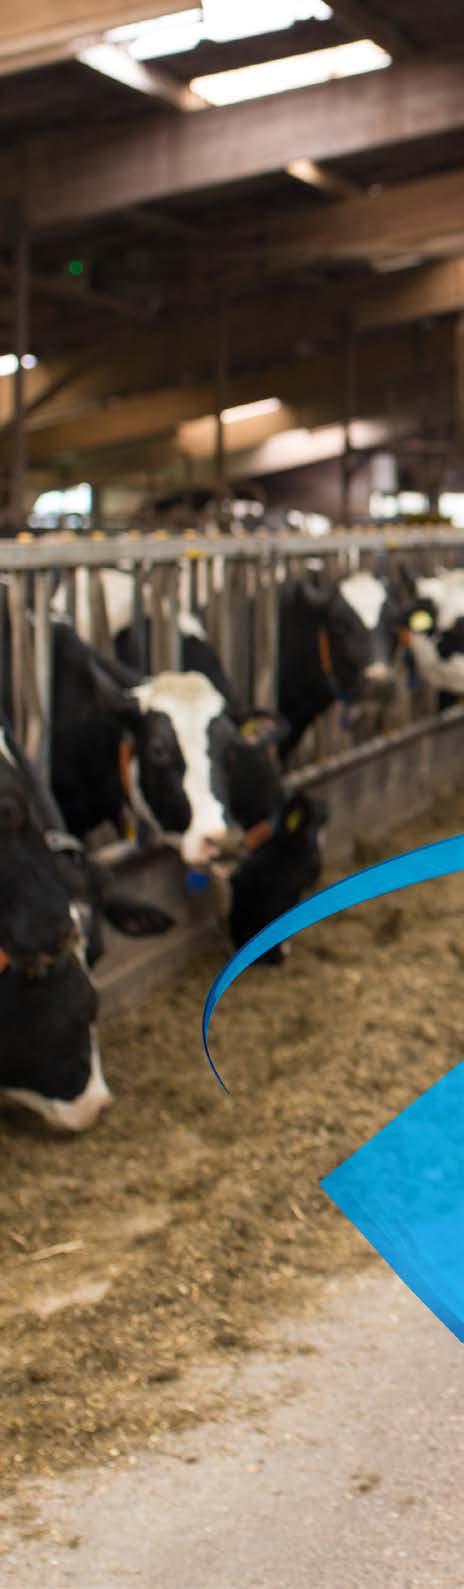 IT ALL REVOLVES AROUND YOU We have built DeLaval DelPro and its suite of sensors and applications to give you more control than ever before, by surrounding you with faster, more accurate access to